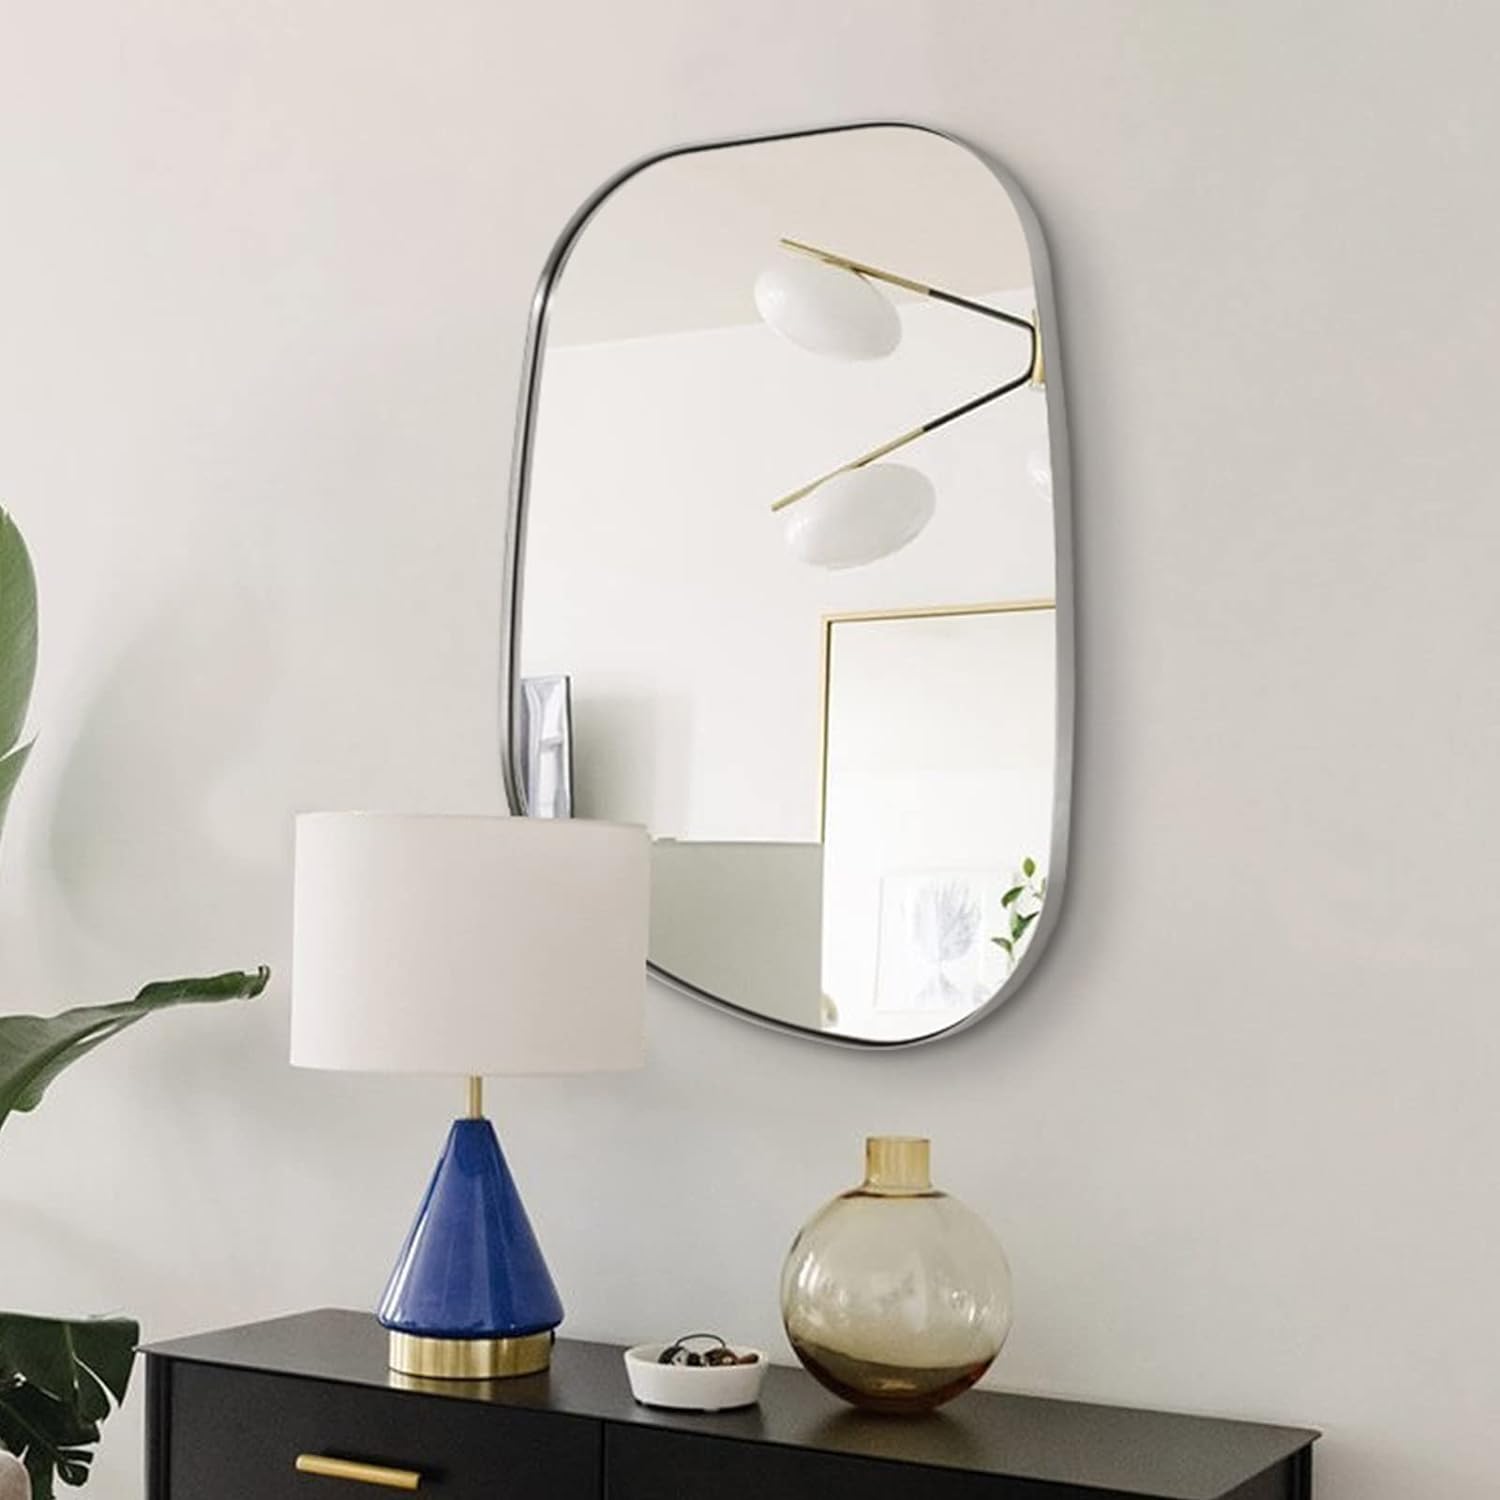 ANDY STAR Asymmetrical Mirror, ” Brushed Nickel Bathroom Mirror Artistic Mirror for Living Room Entryway Bedroom, Irregular Mirror Stainless Steel Framed Wall Mounted Decorative Mirror